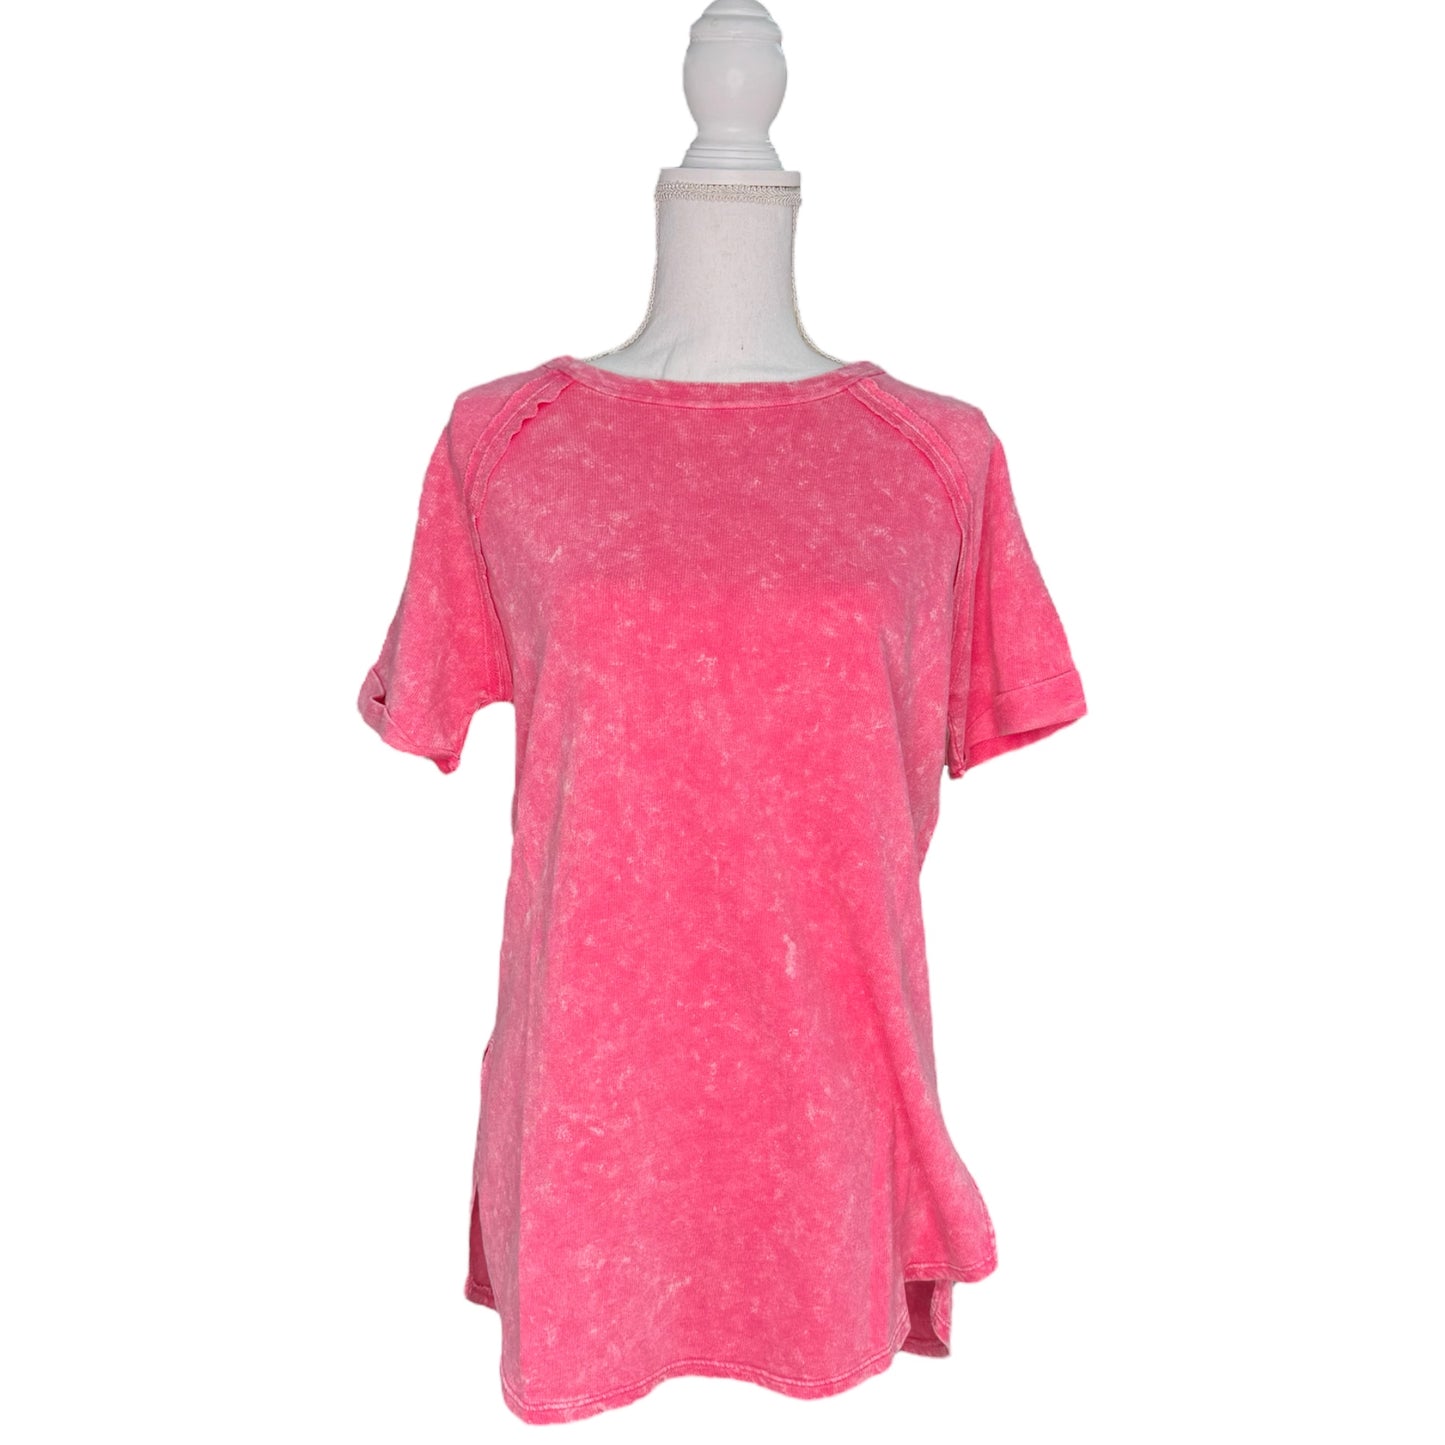 Zenana Washed Tee with Accented Hems - Pink